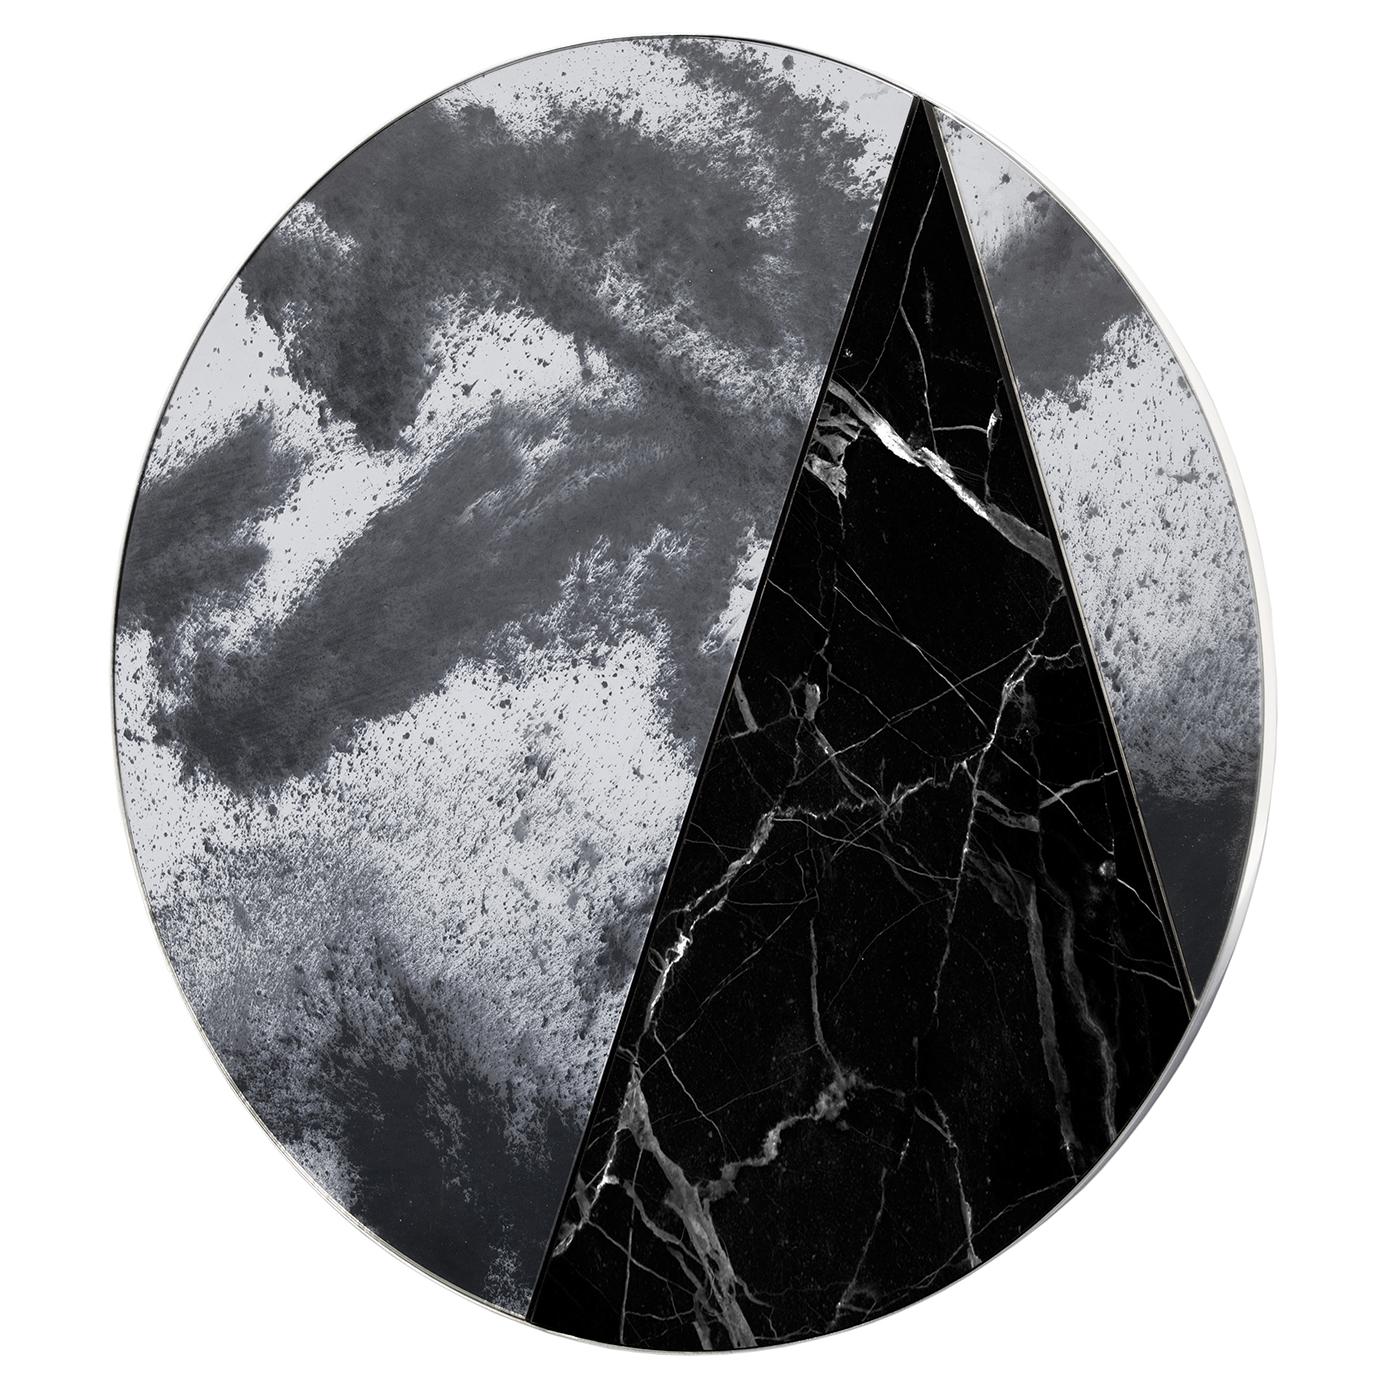 A moody piece for contemporary spaces, the Itinera Res Lunare V Mirror is made in collaboration with Siena's Antique Mirror glass factory. On a stainless steel base, shards of glass frame a piece of chic Marquinia marble, characterized by its